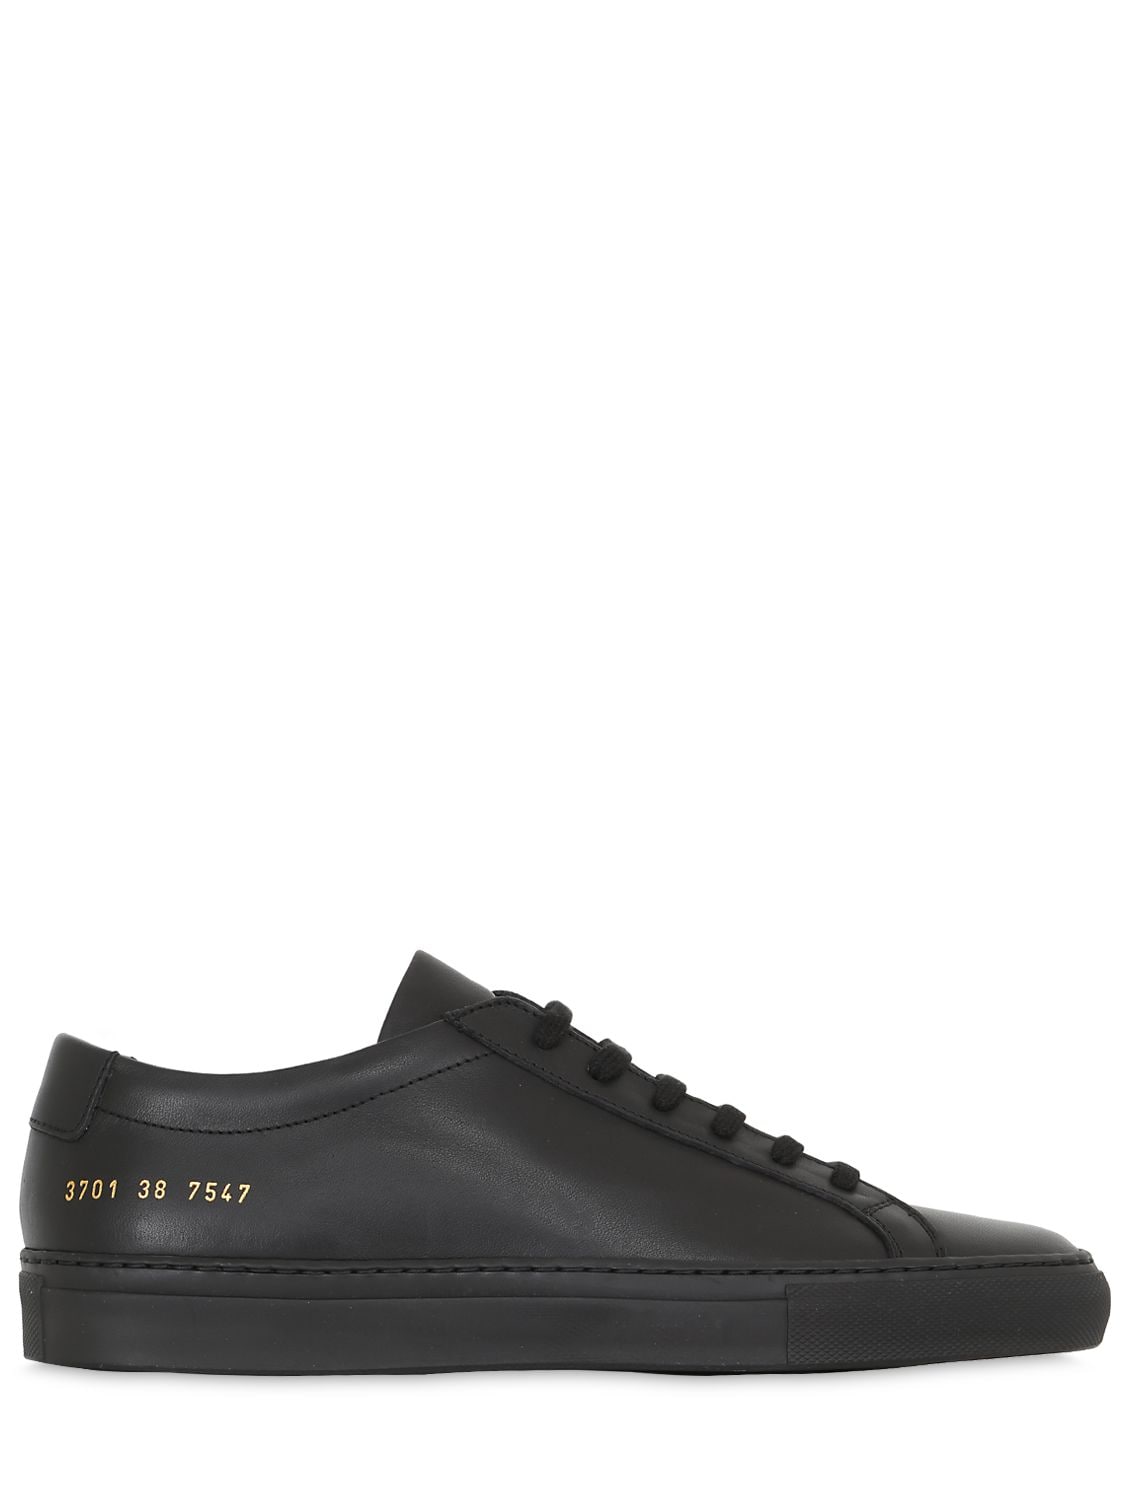 Common Projects Original Achilles Nappa Leather Sneakers In Black